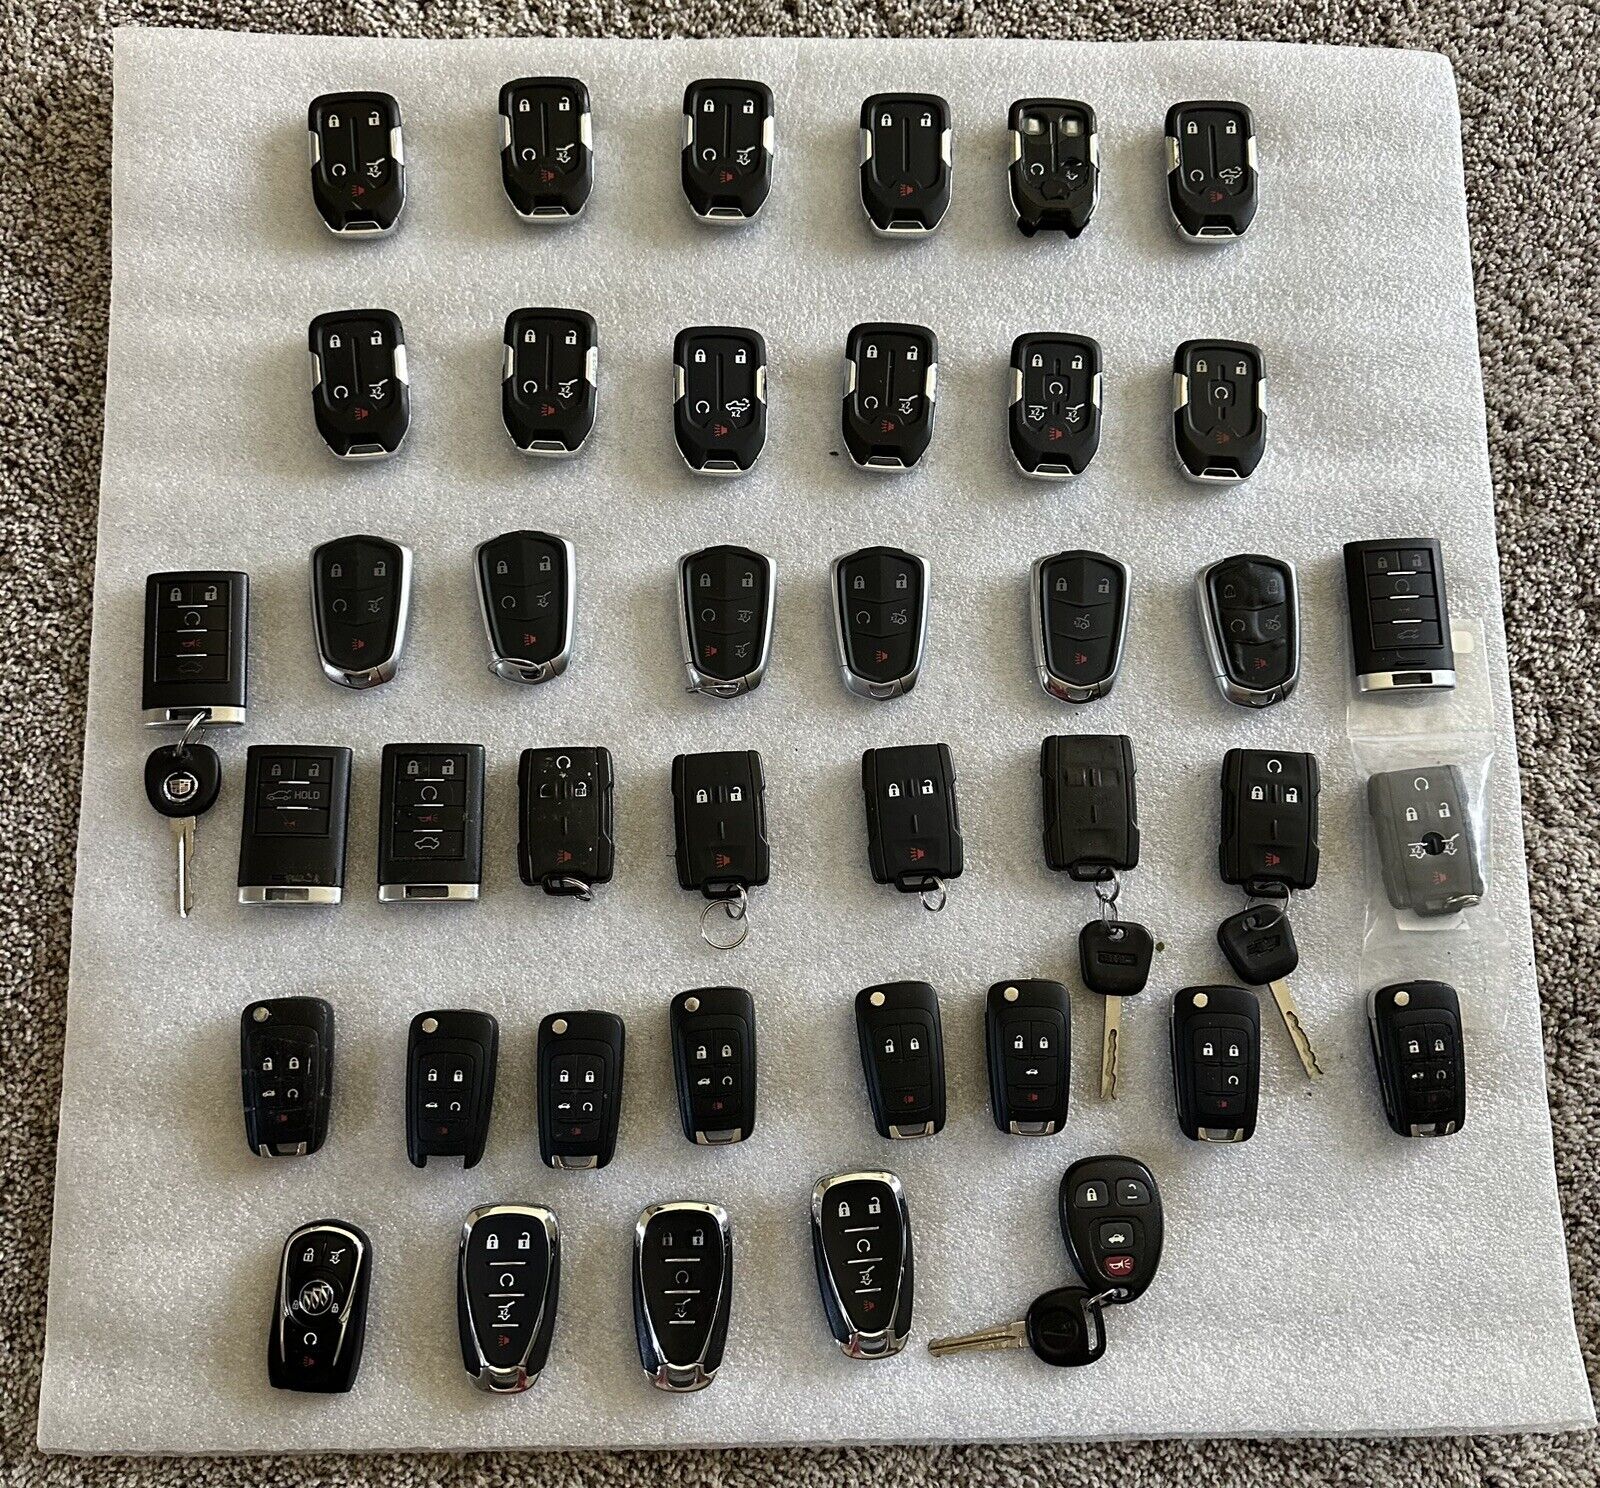 LOT OF 41 General Motors Key Fobs. Chevy/GMC/Cadillac/Buick fobs Included